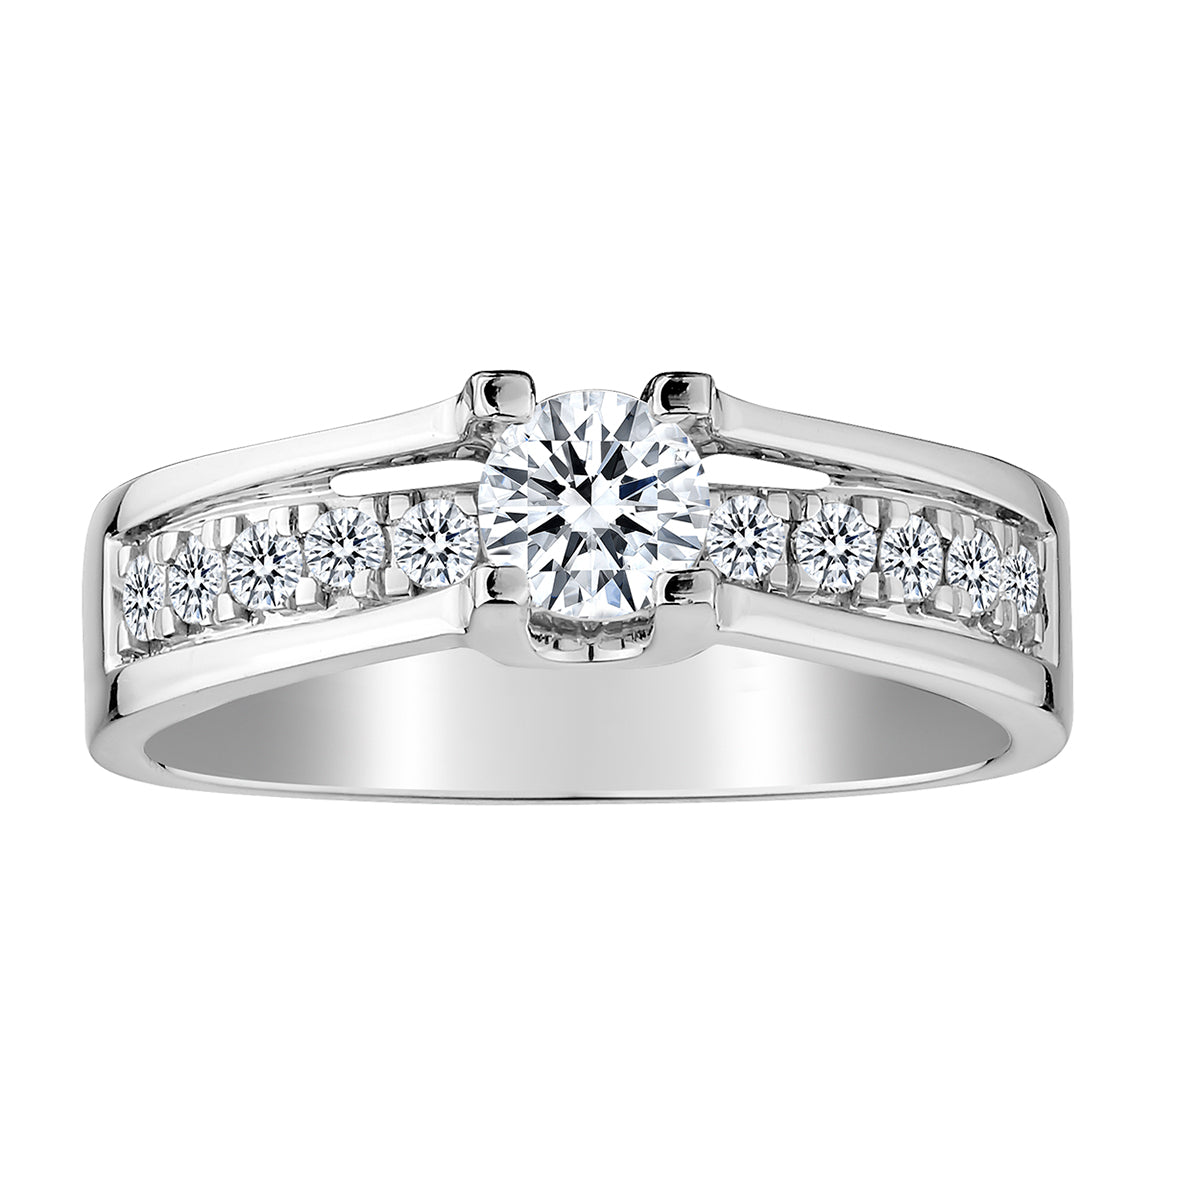 .75 Carat Euro Shank Engagement Diamond Ring,  14kt White Gold. Griffin Jewellery Designs